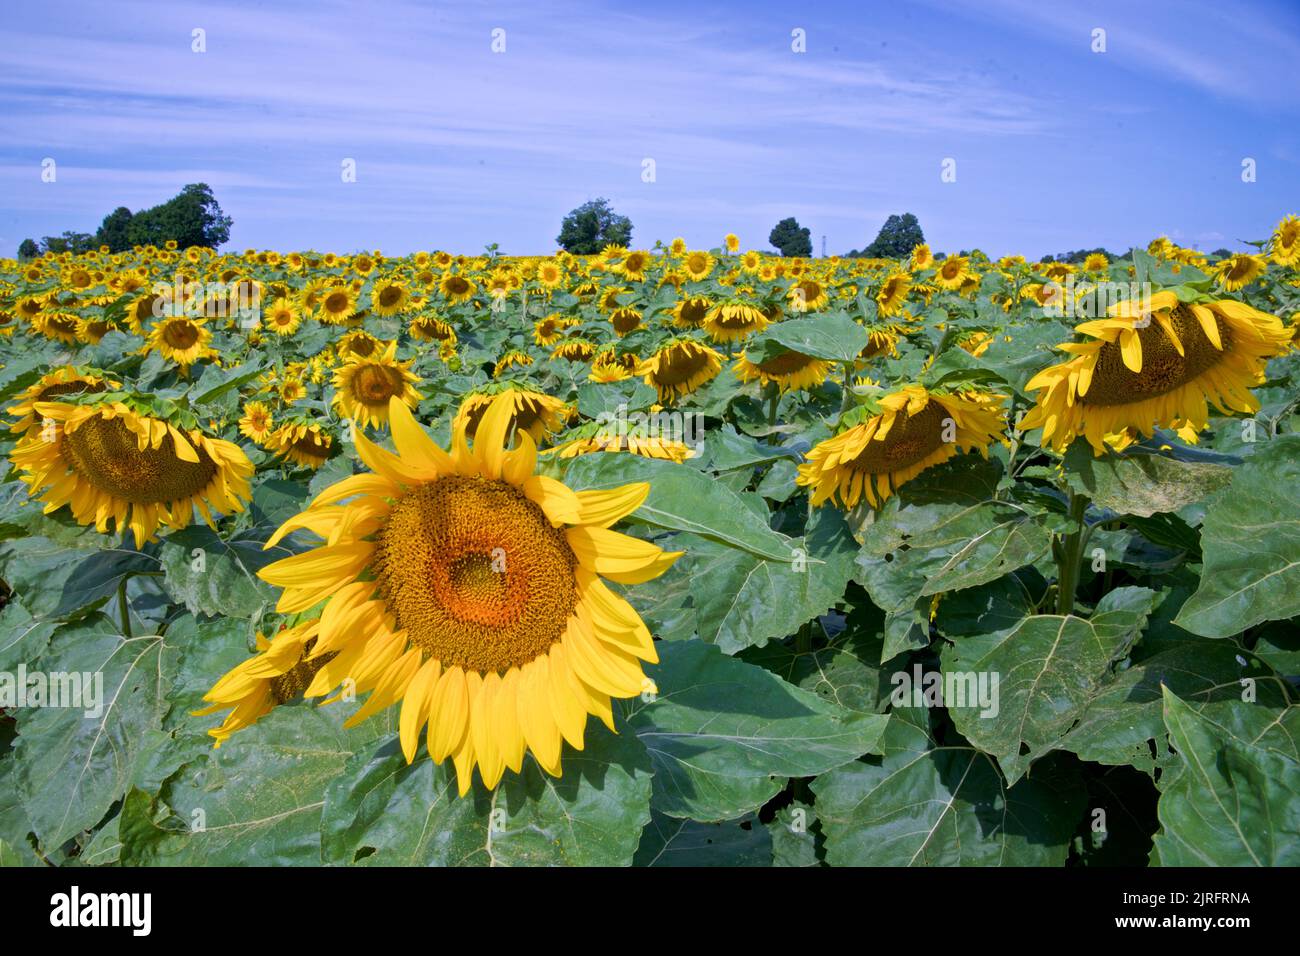 Close-up of a sunflower on the sunflower field Stock Photo